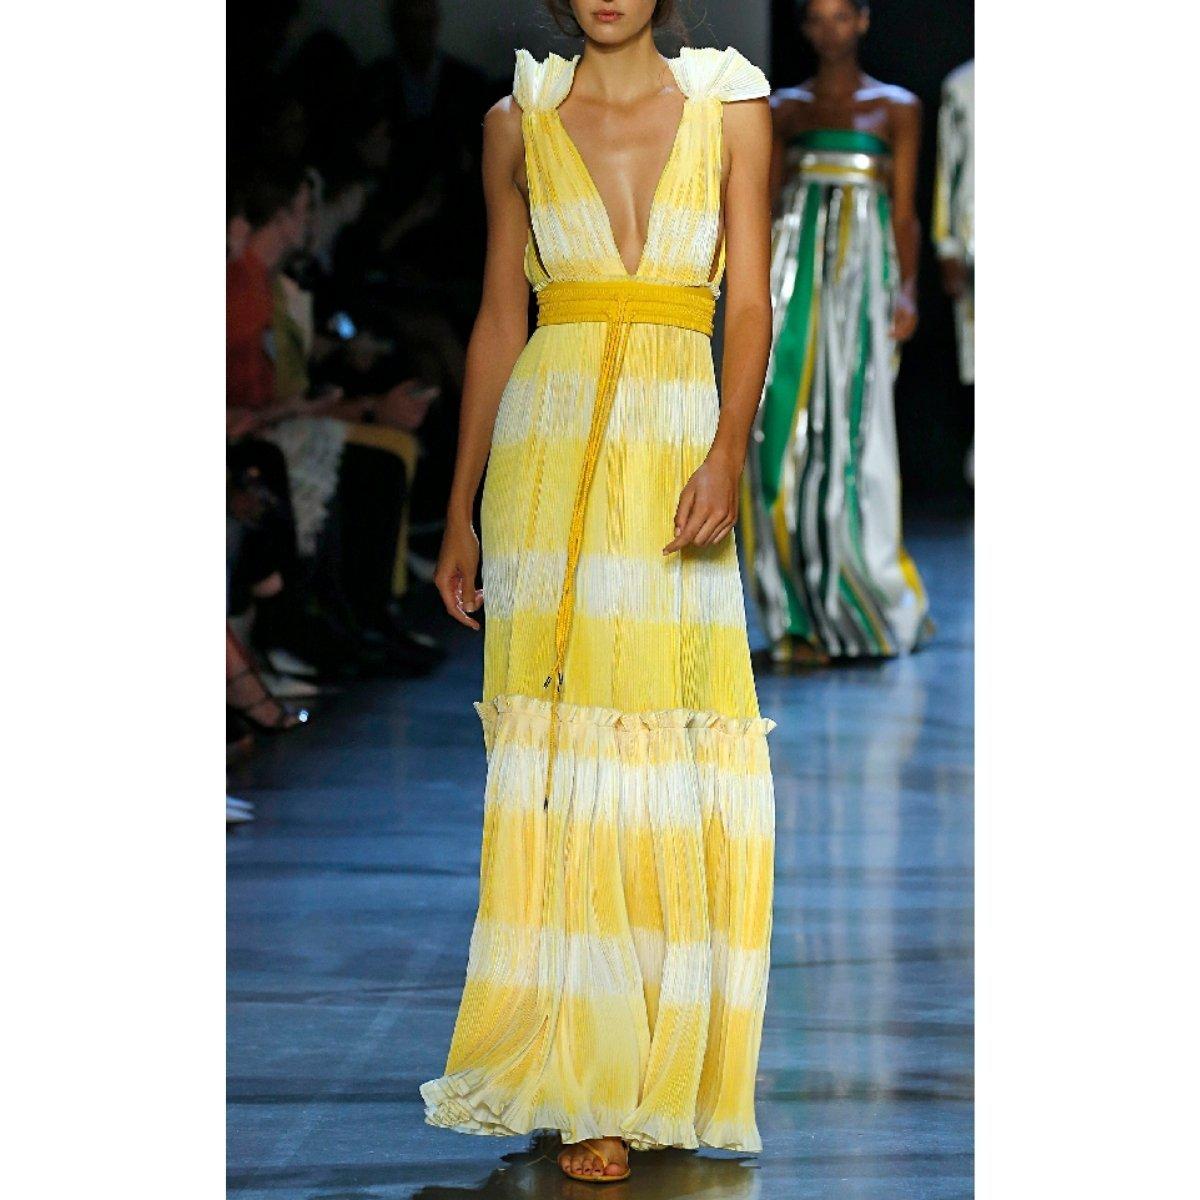 Prabal Gurung's 'Tadia' plissé gown brings a little sunshine to your closet. 
Featuring a tie-dye print and ruffled shoulder attachments, the maxi-dress plunges into a deep 
V-neckline at the front and back. 
The relaxed silhouette creates